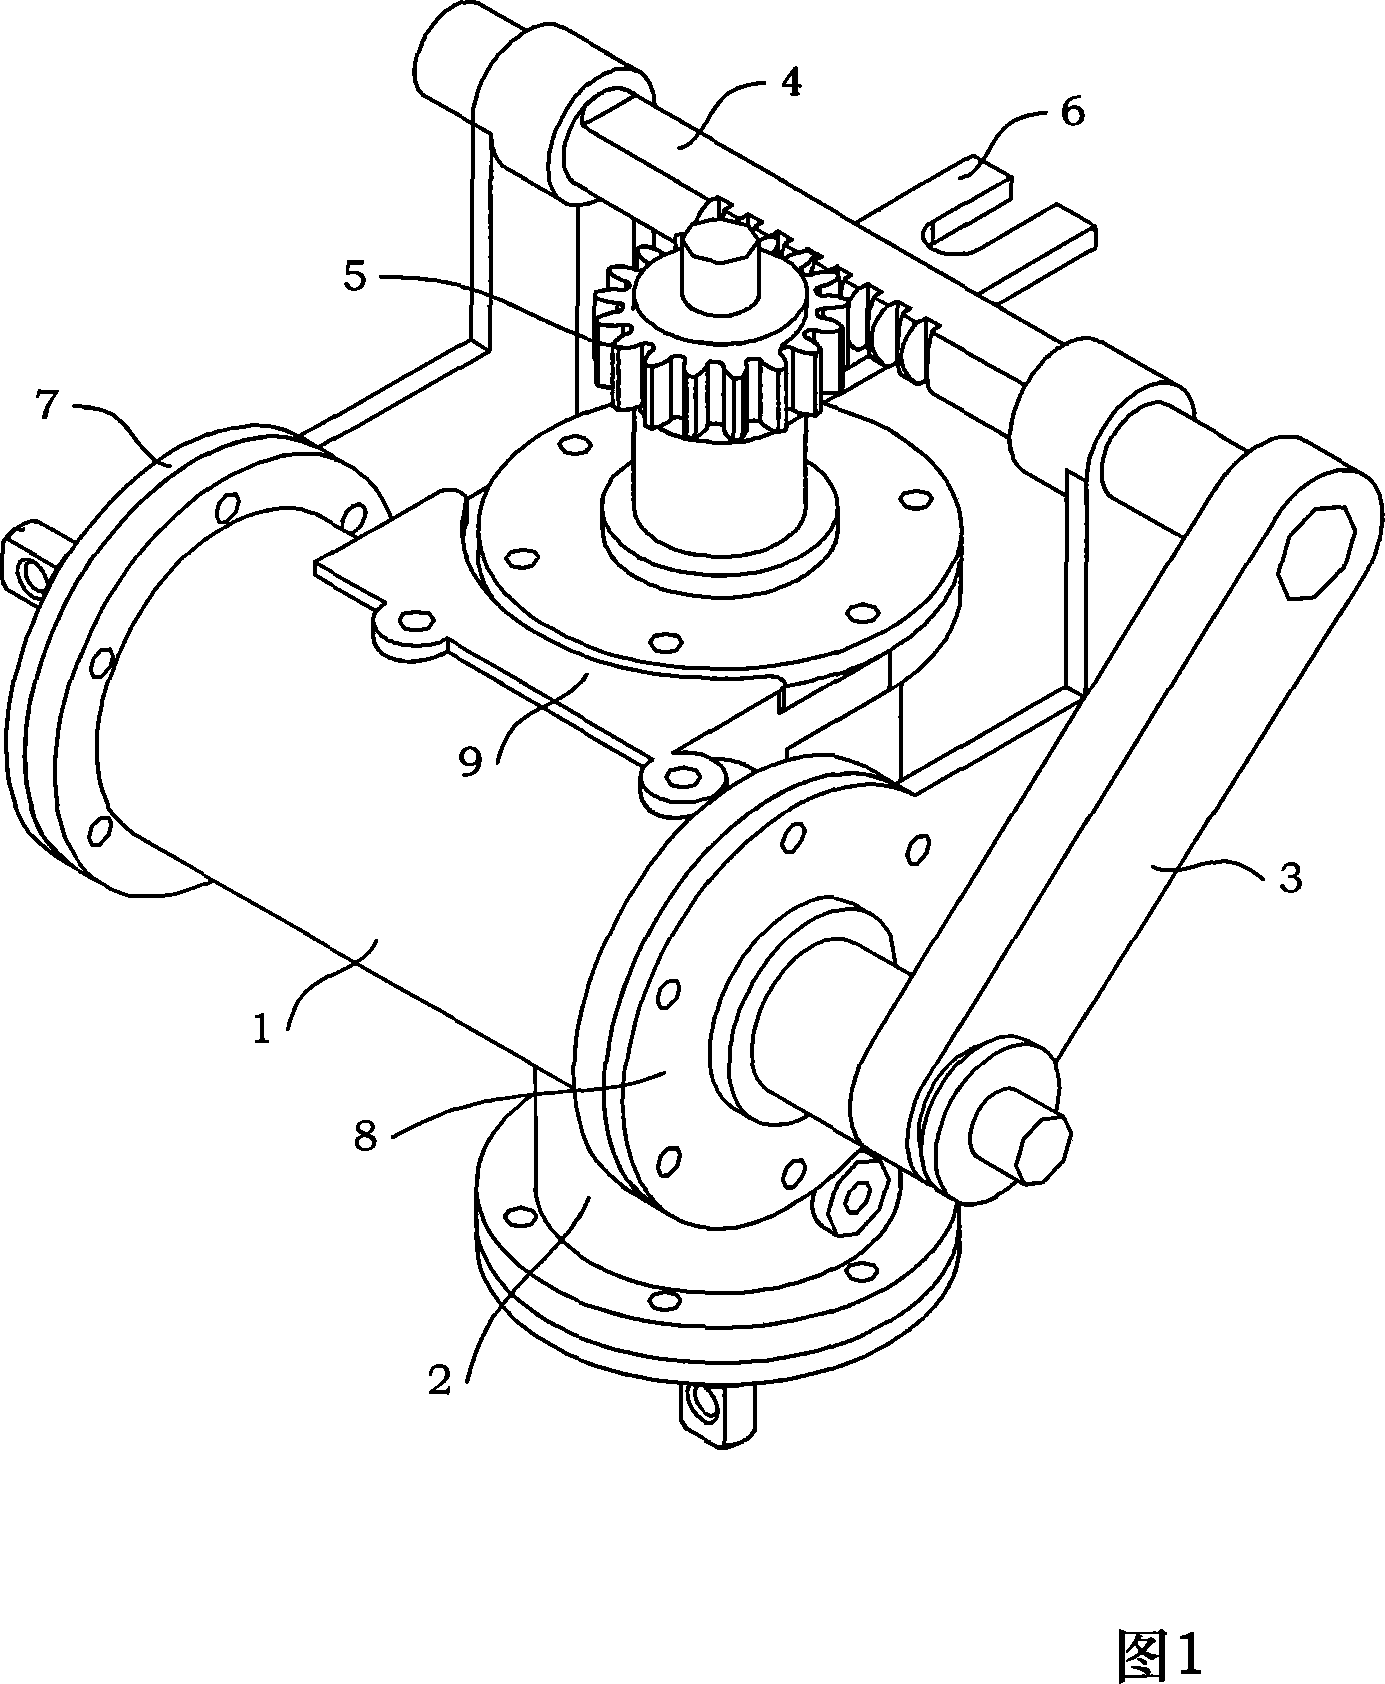 Follow-up type selecting gear shifting hydraulic actuator of vehicle automatic mechanical speed variator